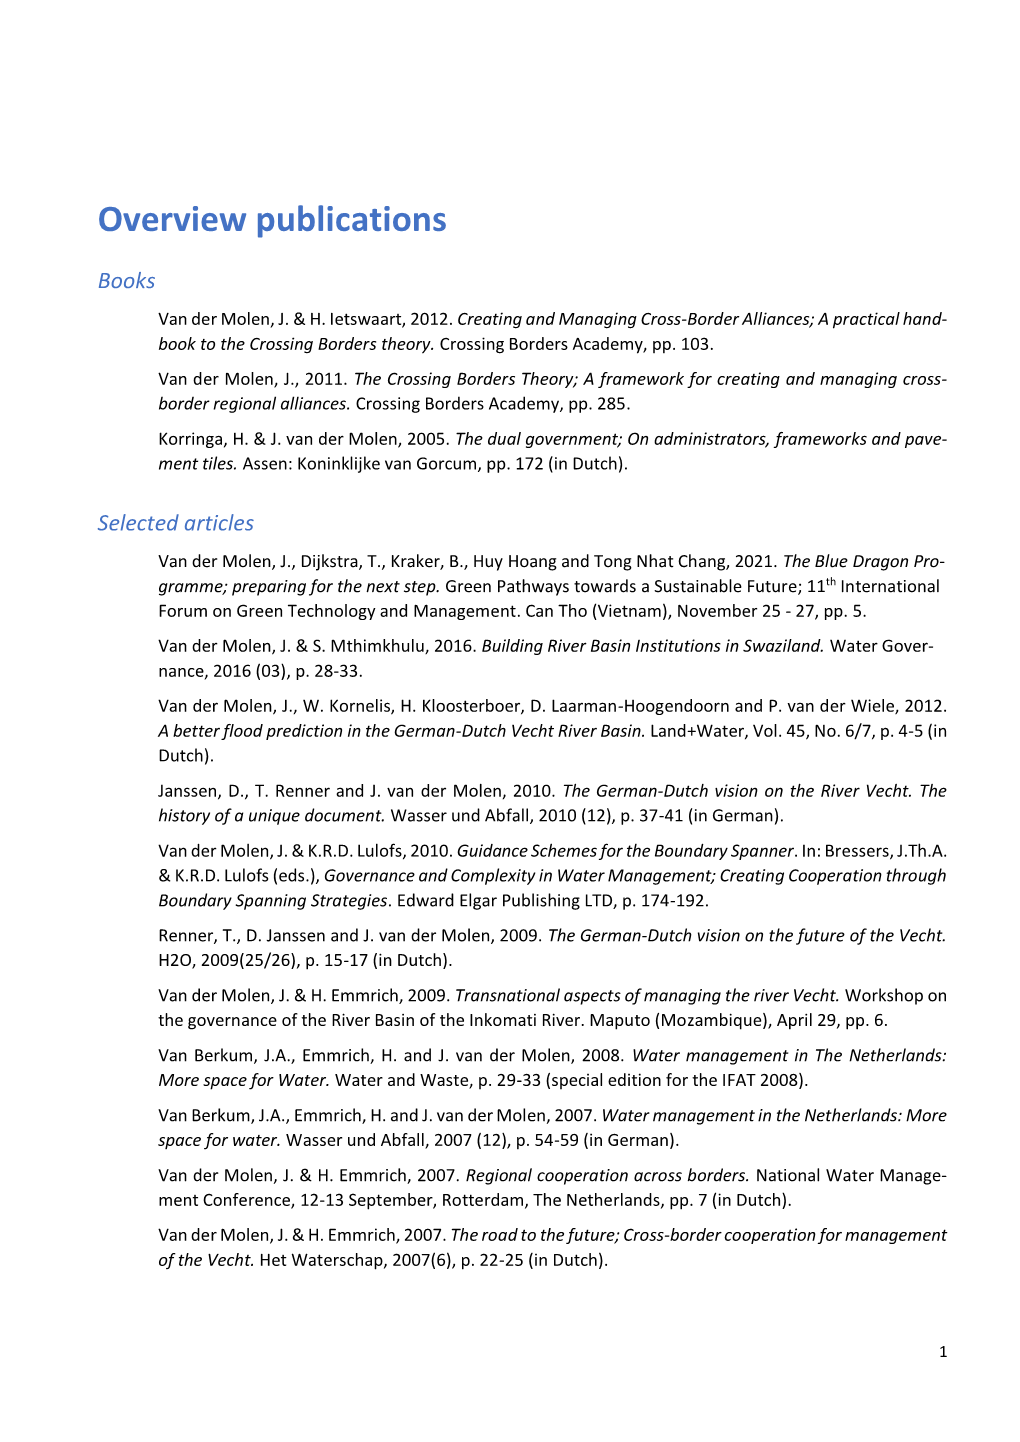 Overview Publications Ani Invited Presentations